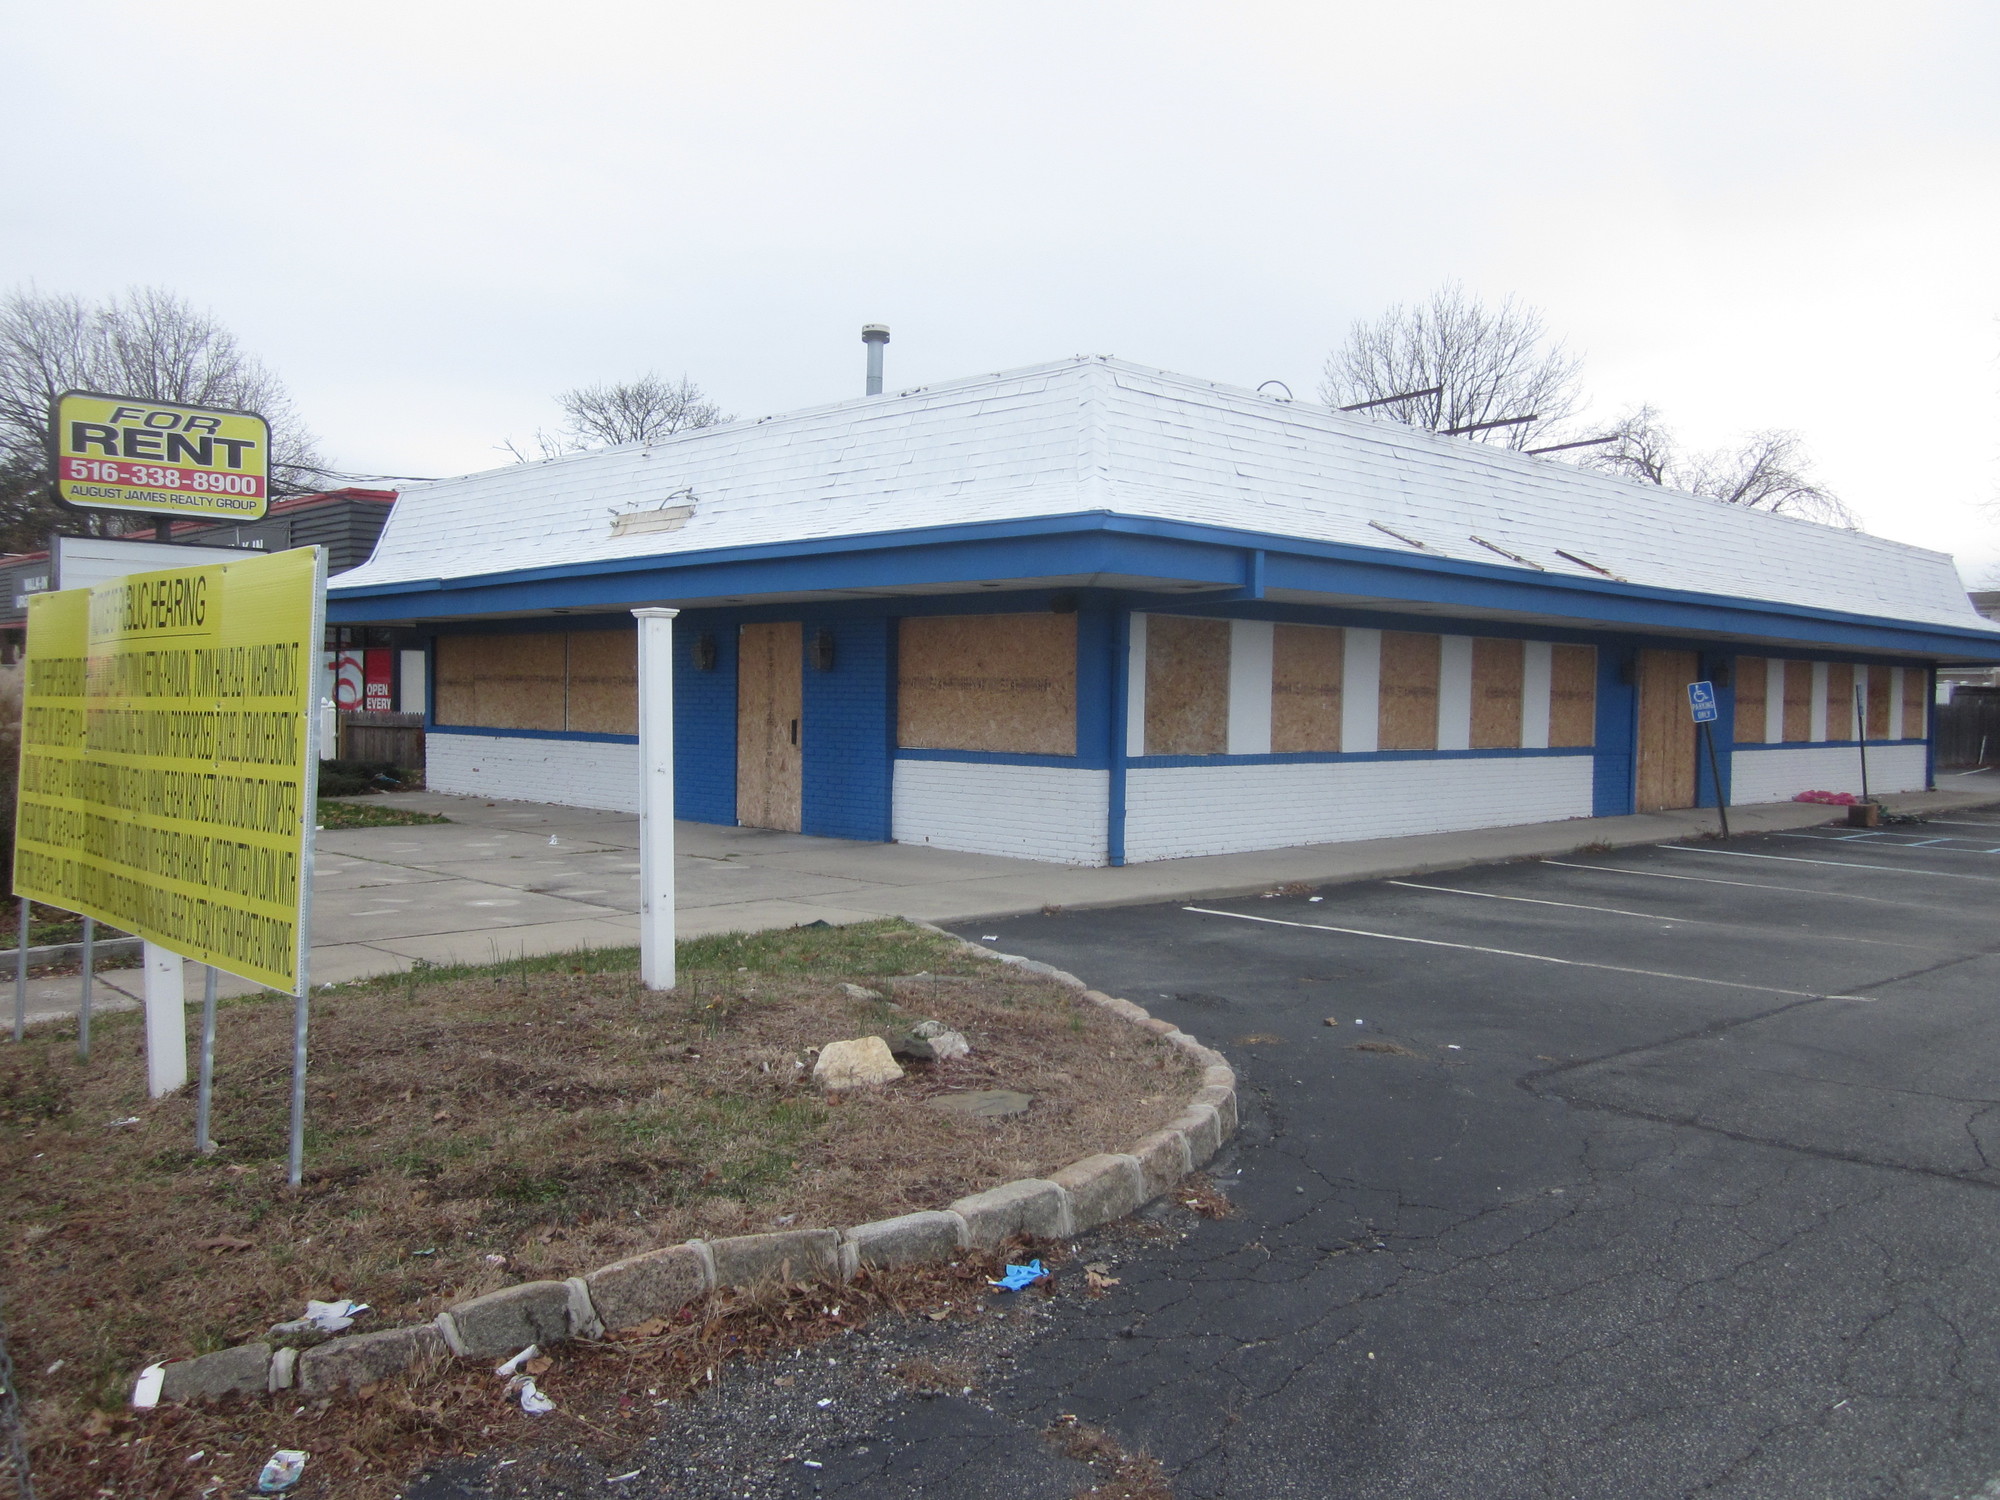 An application to build a Taco Bell on 1939 Hempstead Turnpike to replace a vacant building that once held a Zorn's restaurant was adjourned by the Town of Hempstead's Board of Appeals until Feb 11.